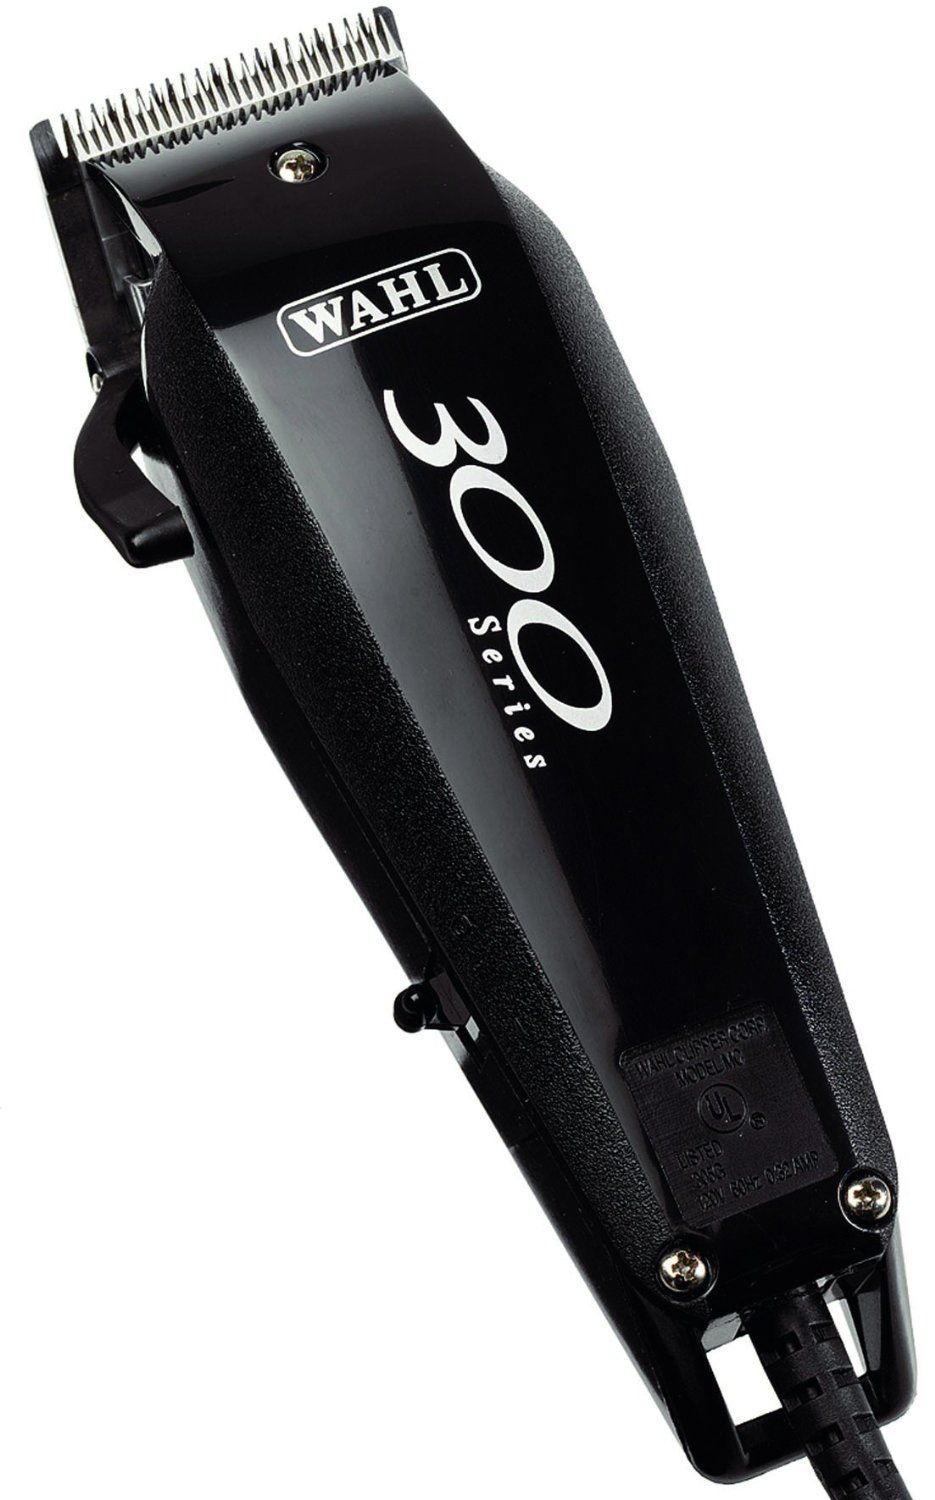 wahl mains hair clippers